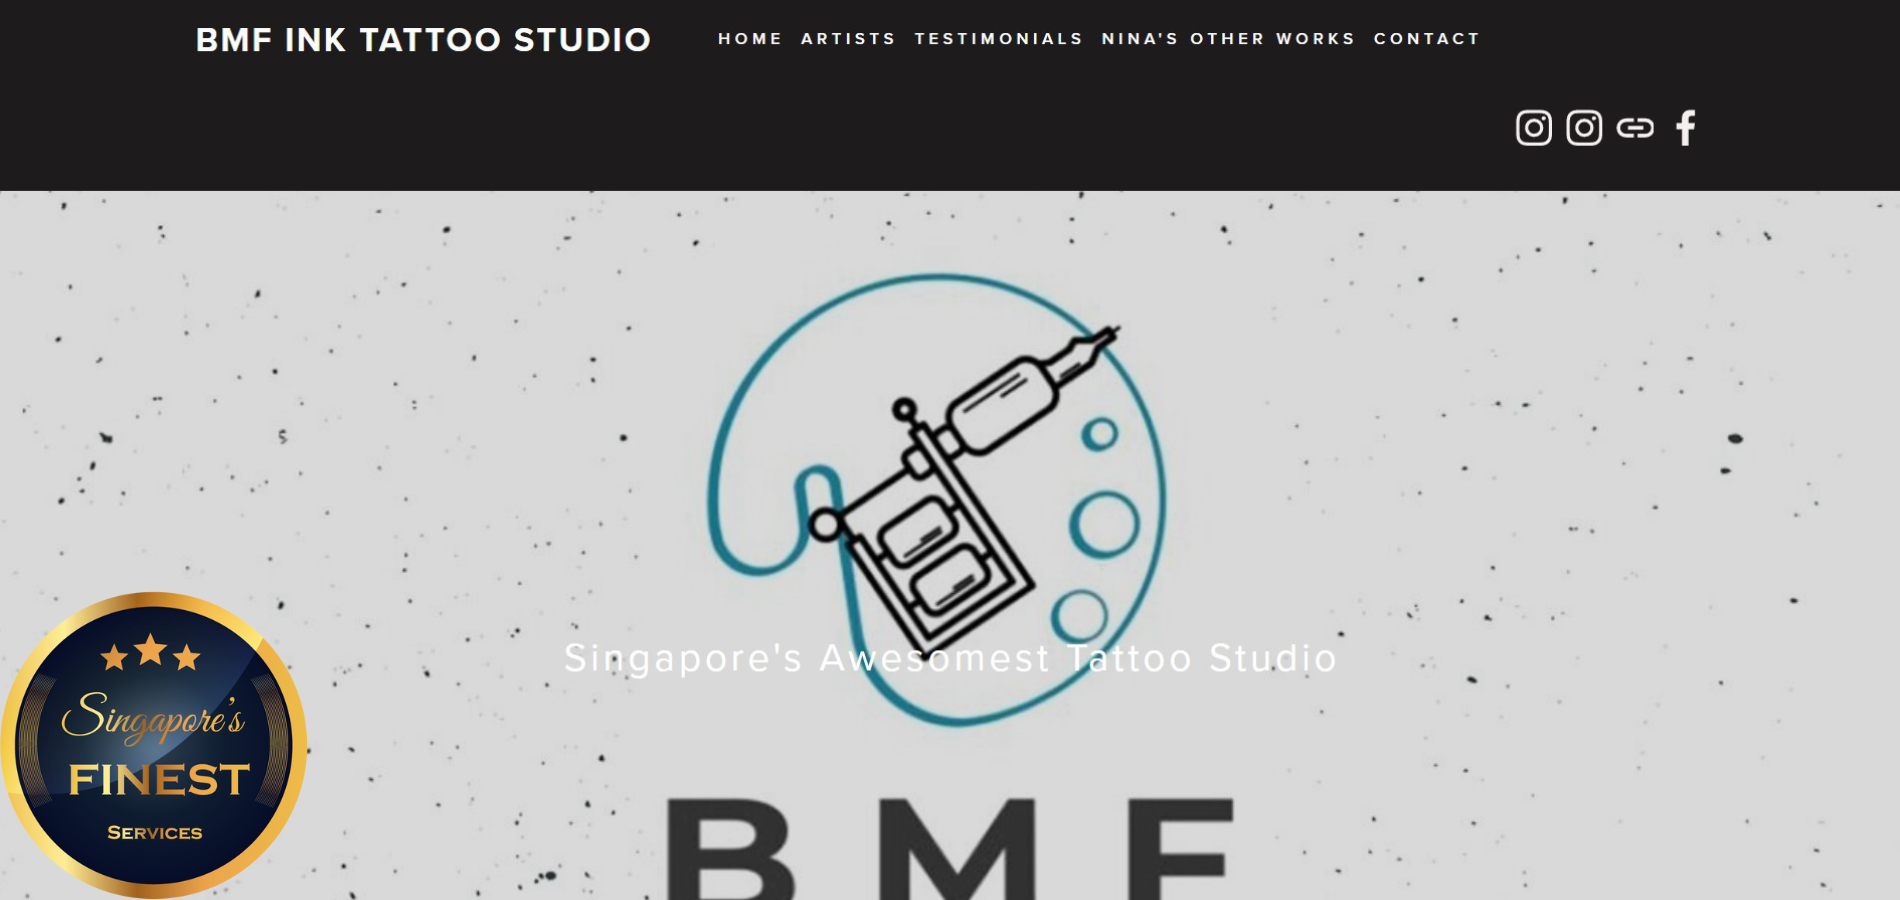 The Finest Tattoo Artists and Studios in Singapore